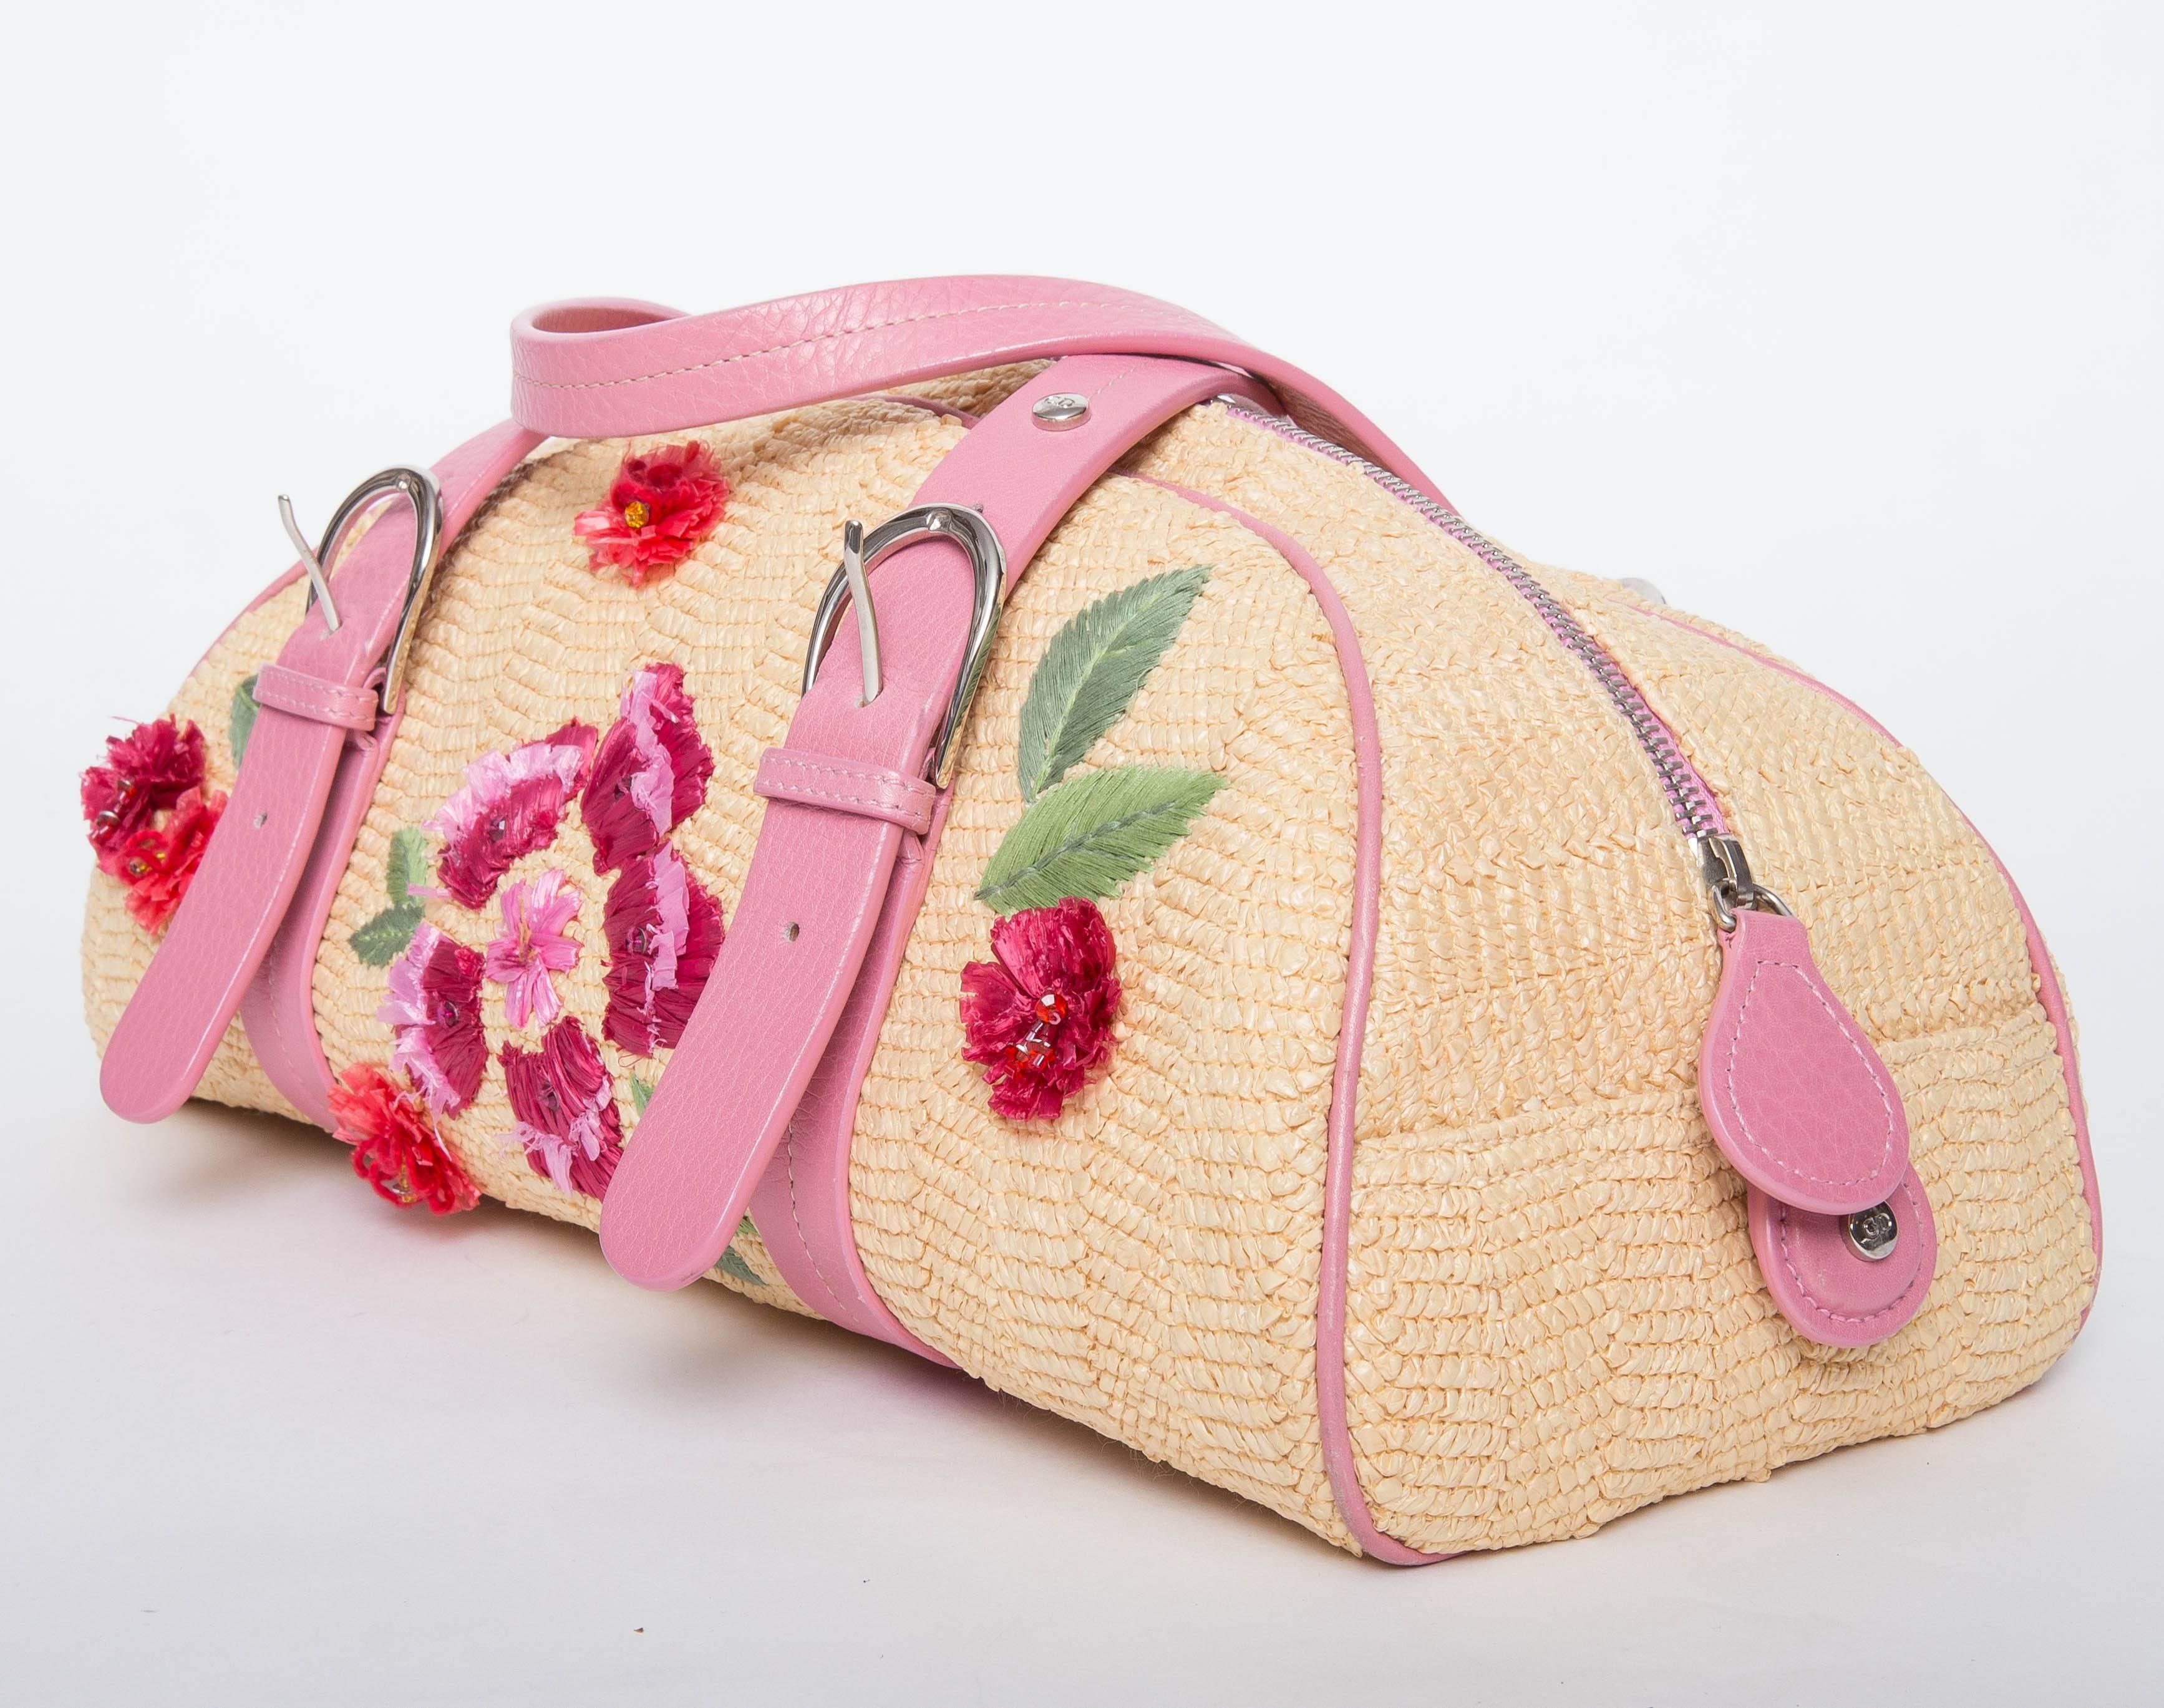 Dior Wicker Frame Bag with Raffia Flowers features soft grained pink leather trim, colorful raffia flowers on the front, silver metal hardware, and pink leather handles.The logo textile lined interior has a zipper pocket with a leather zipper tag